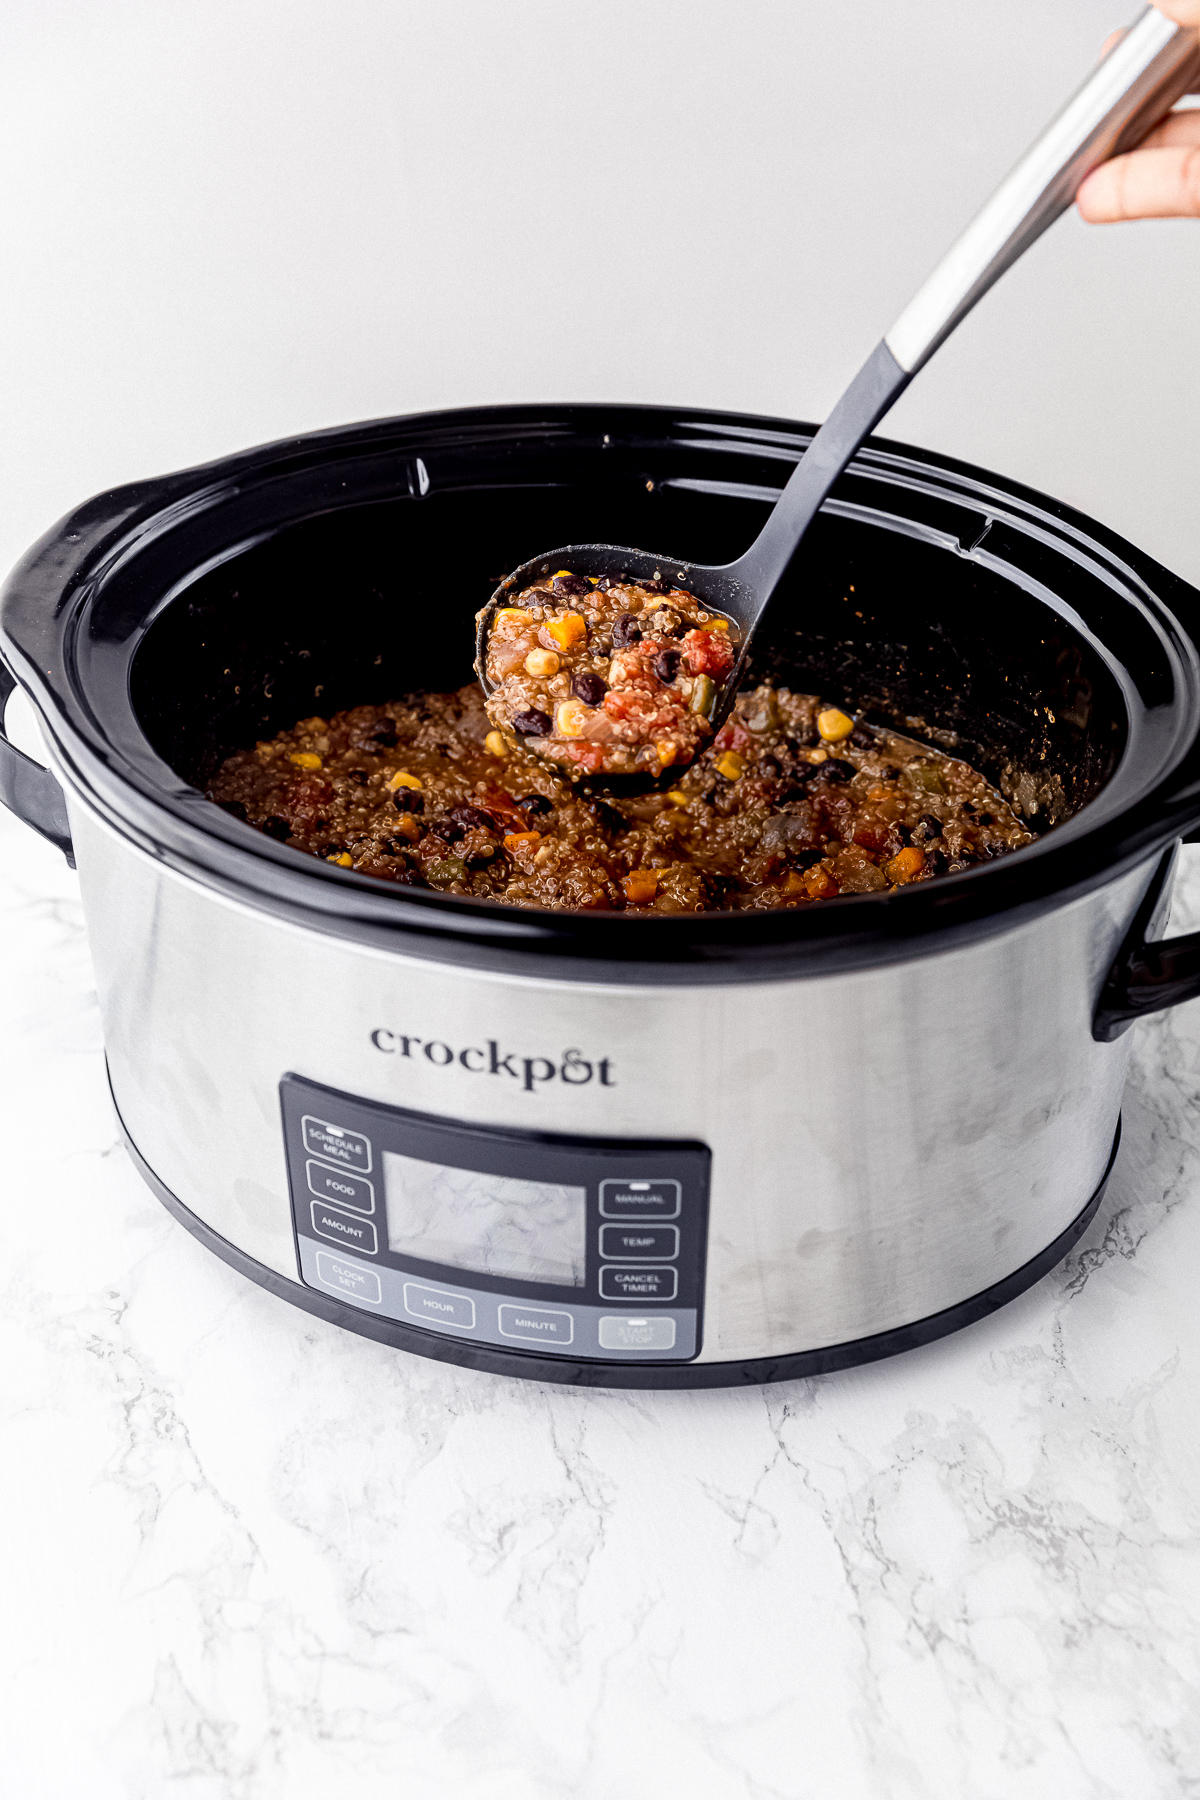 A slow cooker filled with vegan chili, with a ladle taking a serving out